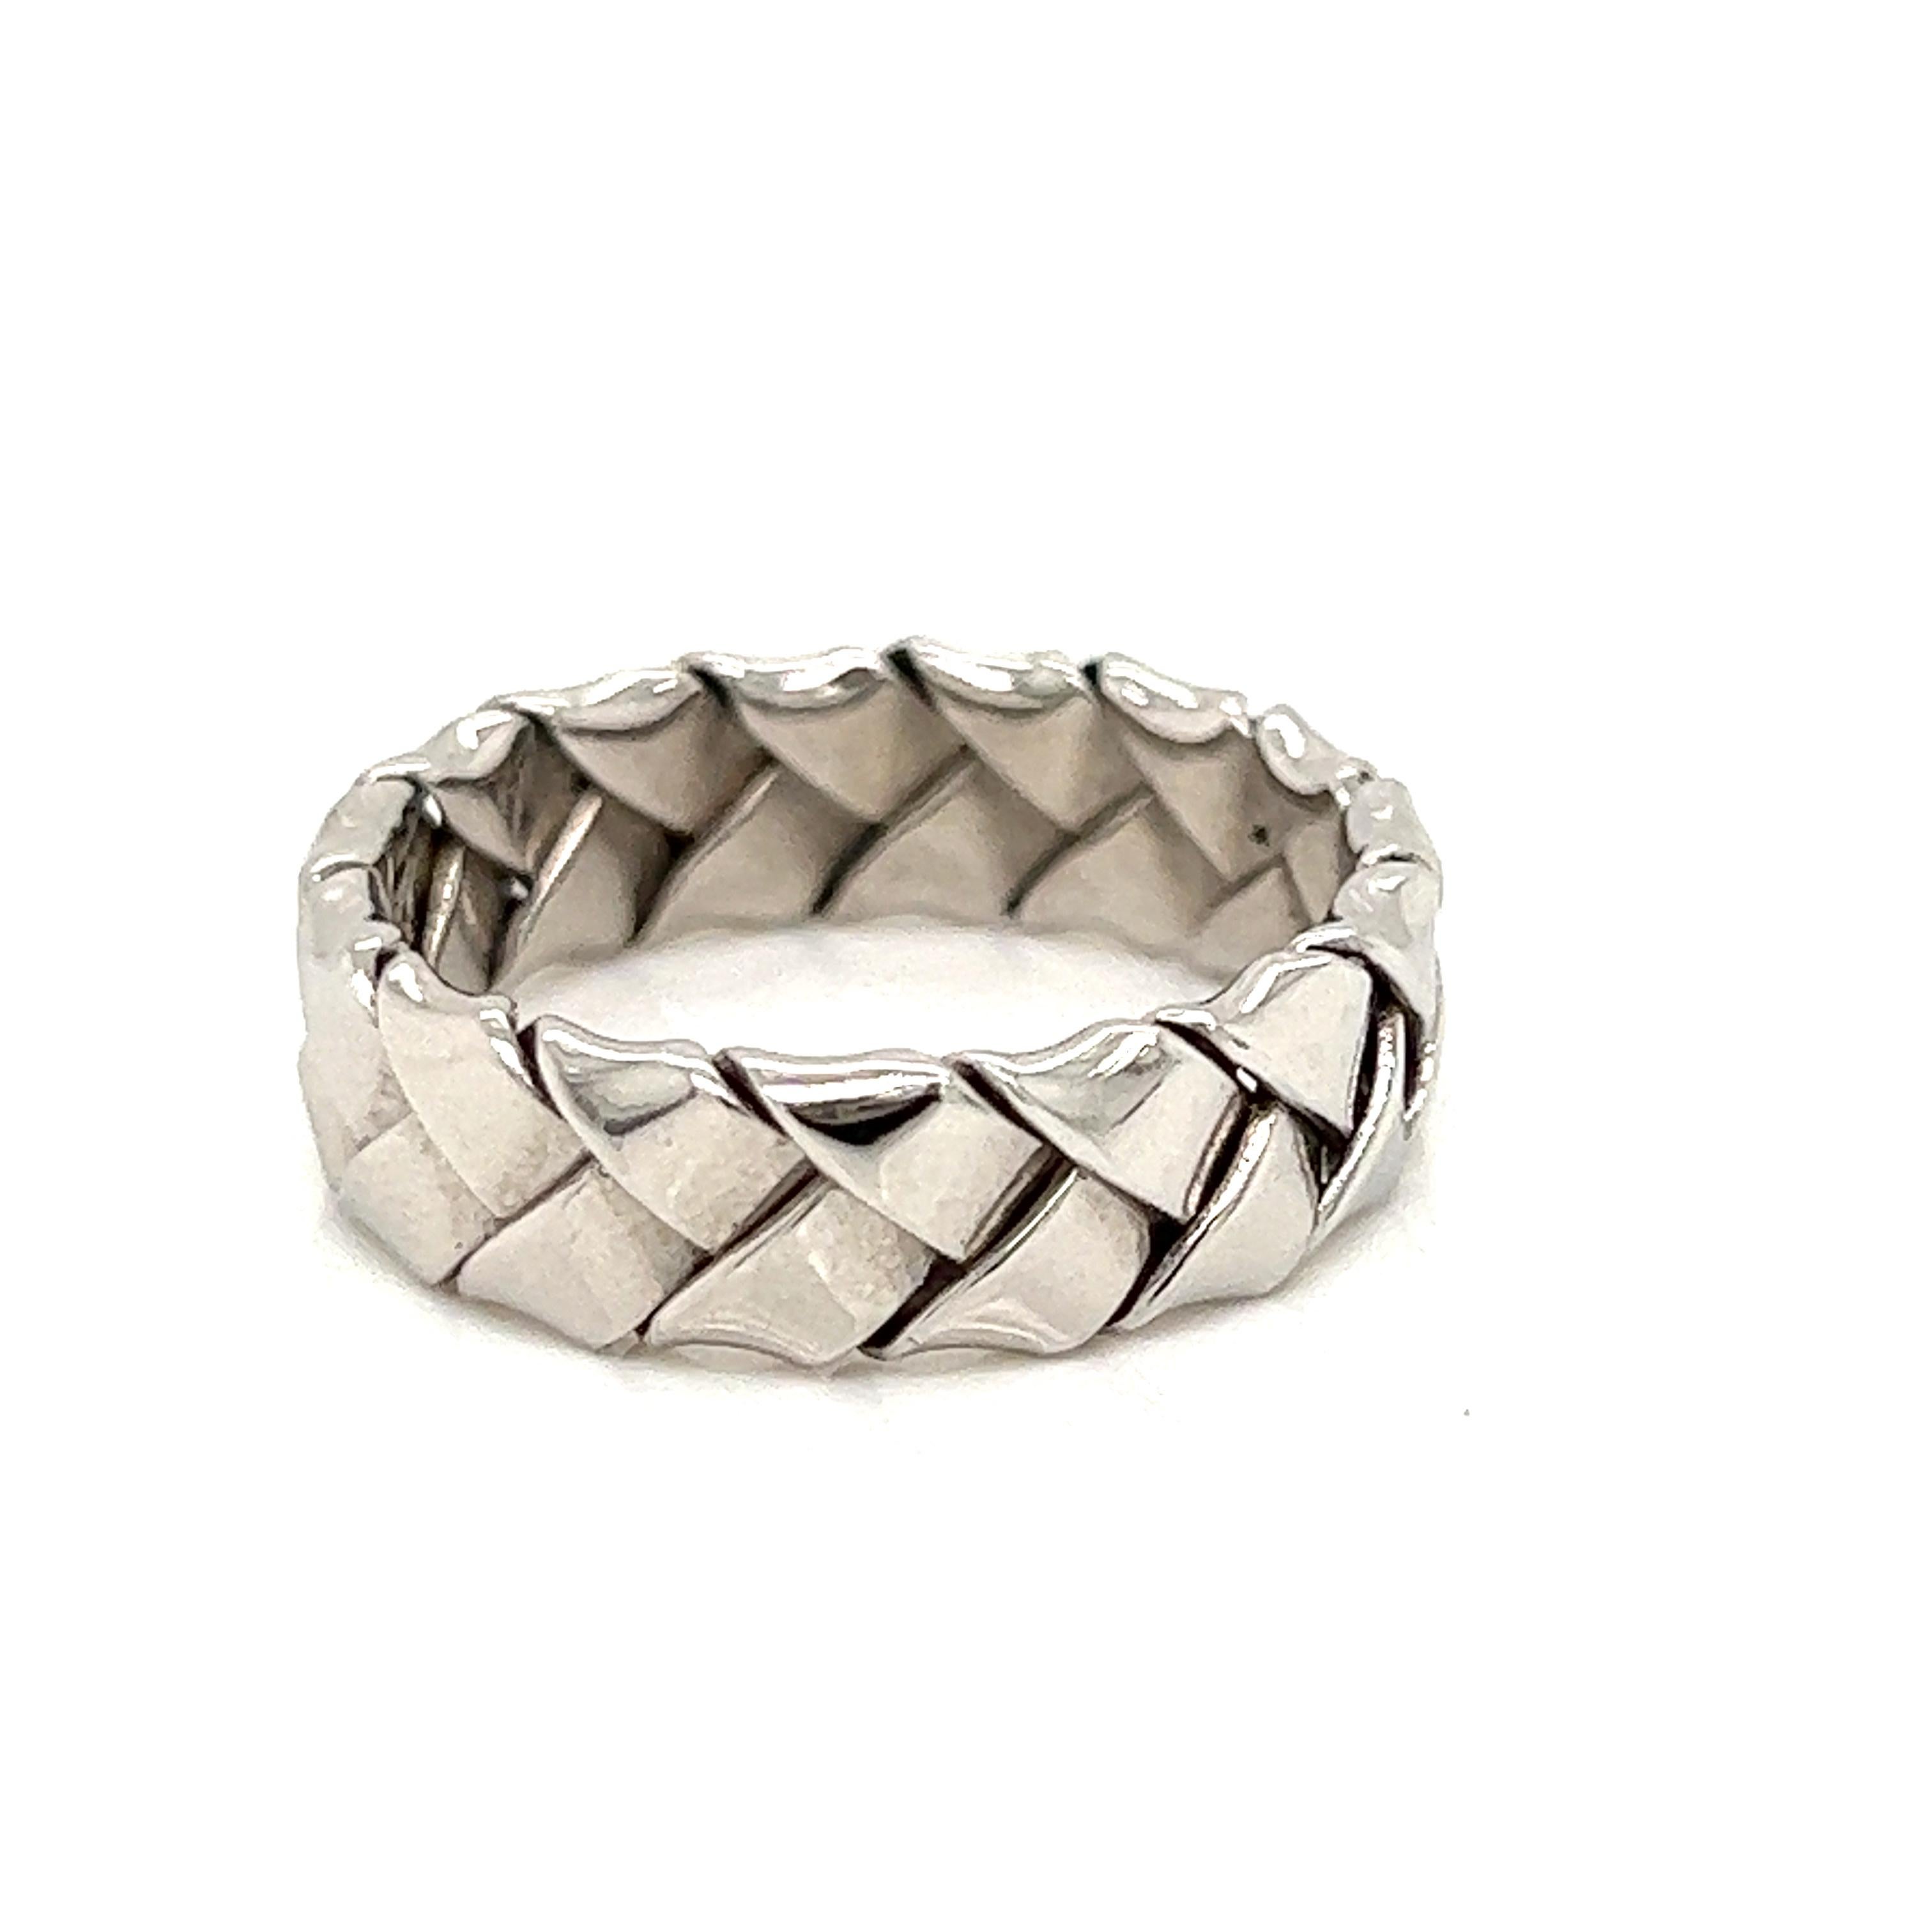 Exquisitely hand woven platinum eternity band. . A stunning wedding band, anniversary ring, stackable ring or just because.  8.9 grams of platinum and 6 mm wide.

The ring size is US 7.25  Because this is an eternity band we do not recommend